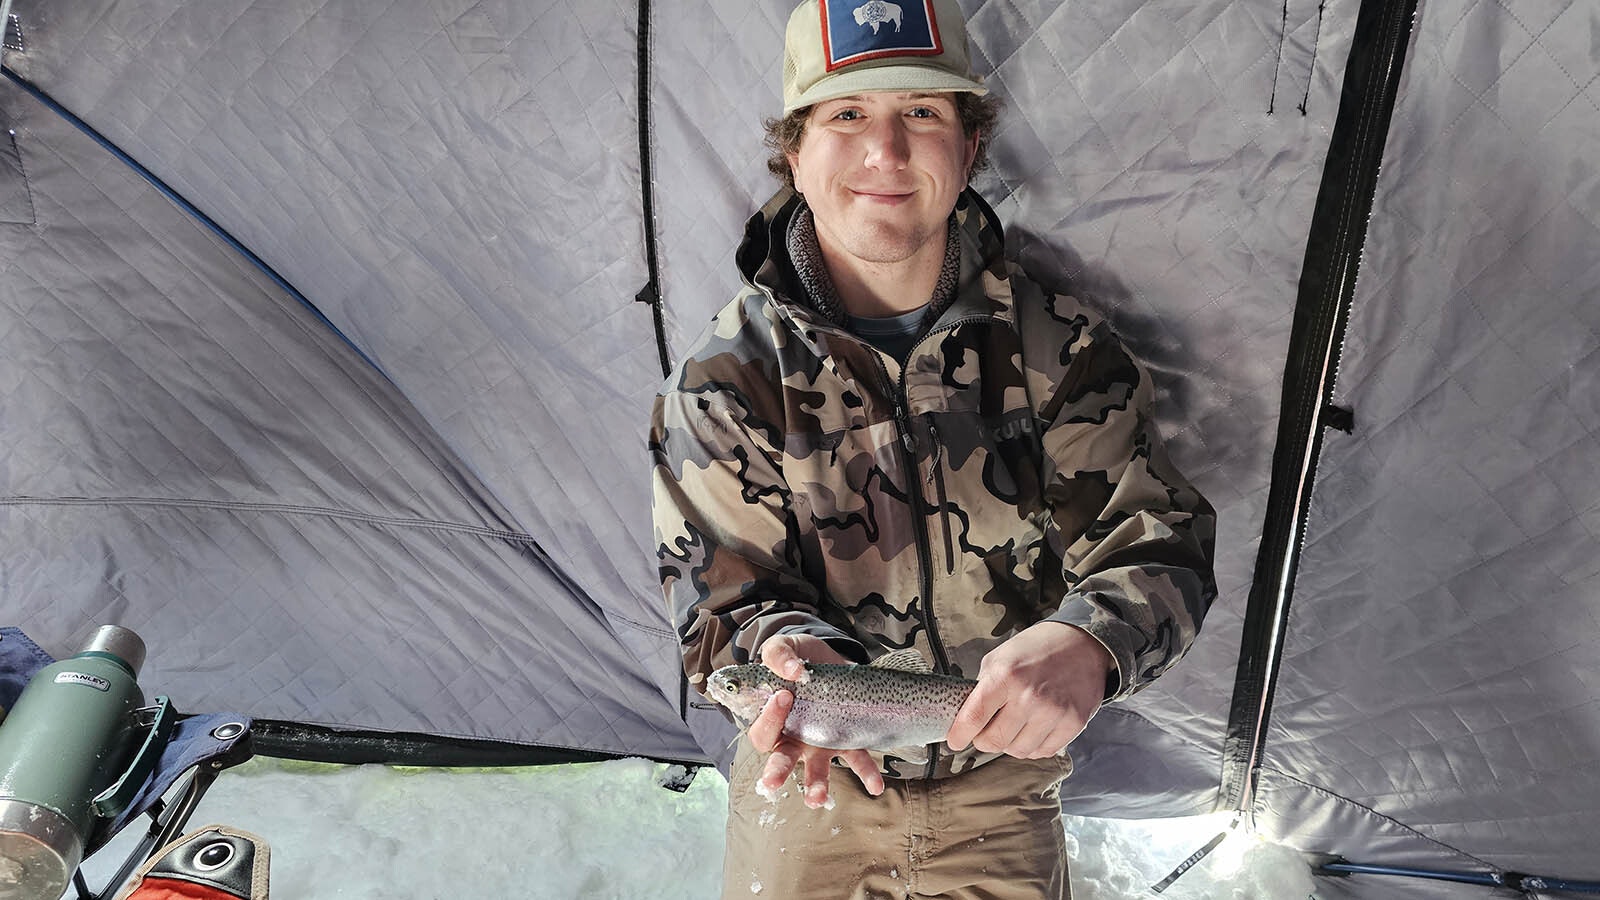 The trout that didn't get away, held by ice fishing guide Isaac Jones from Mississippi.